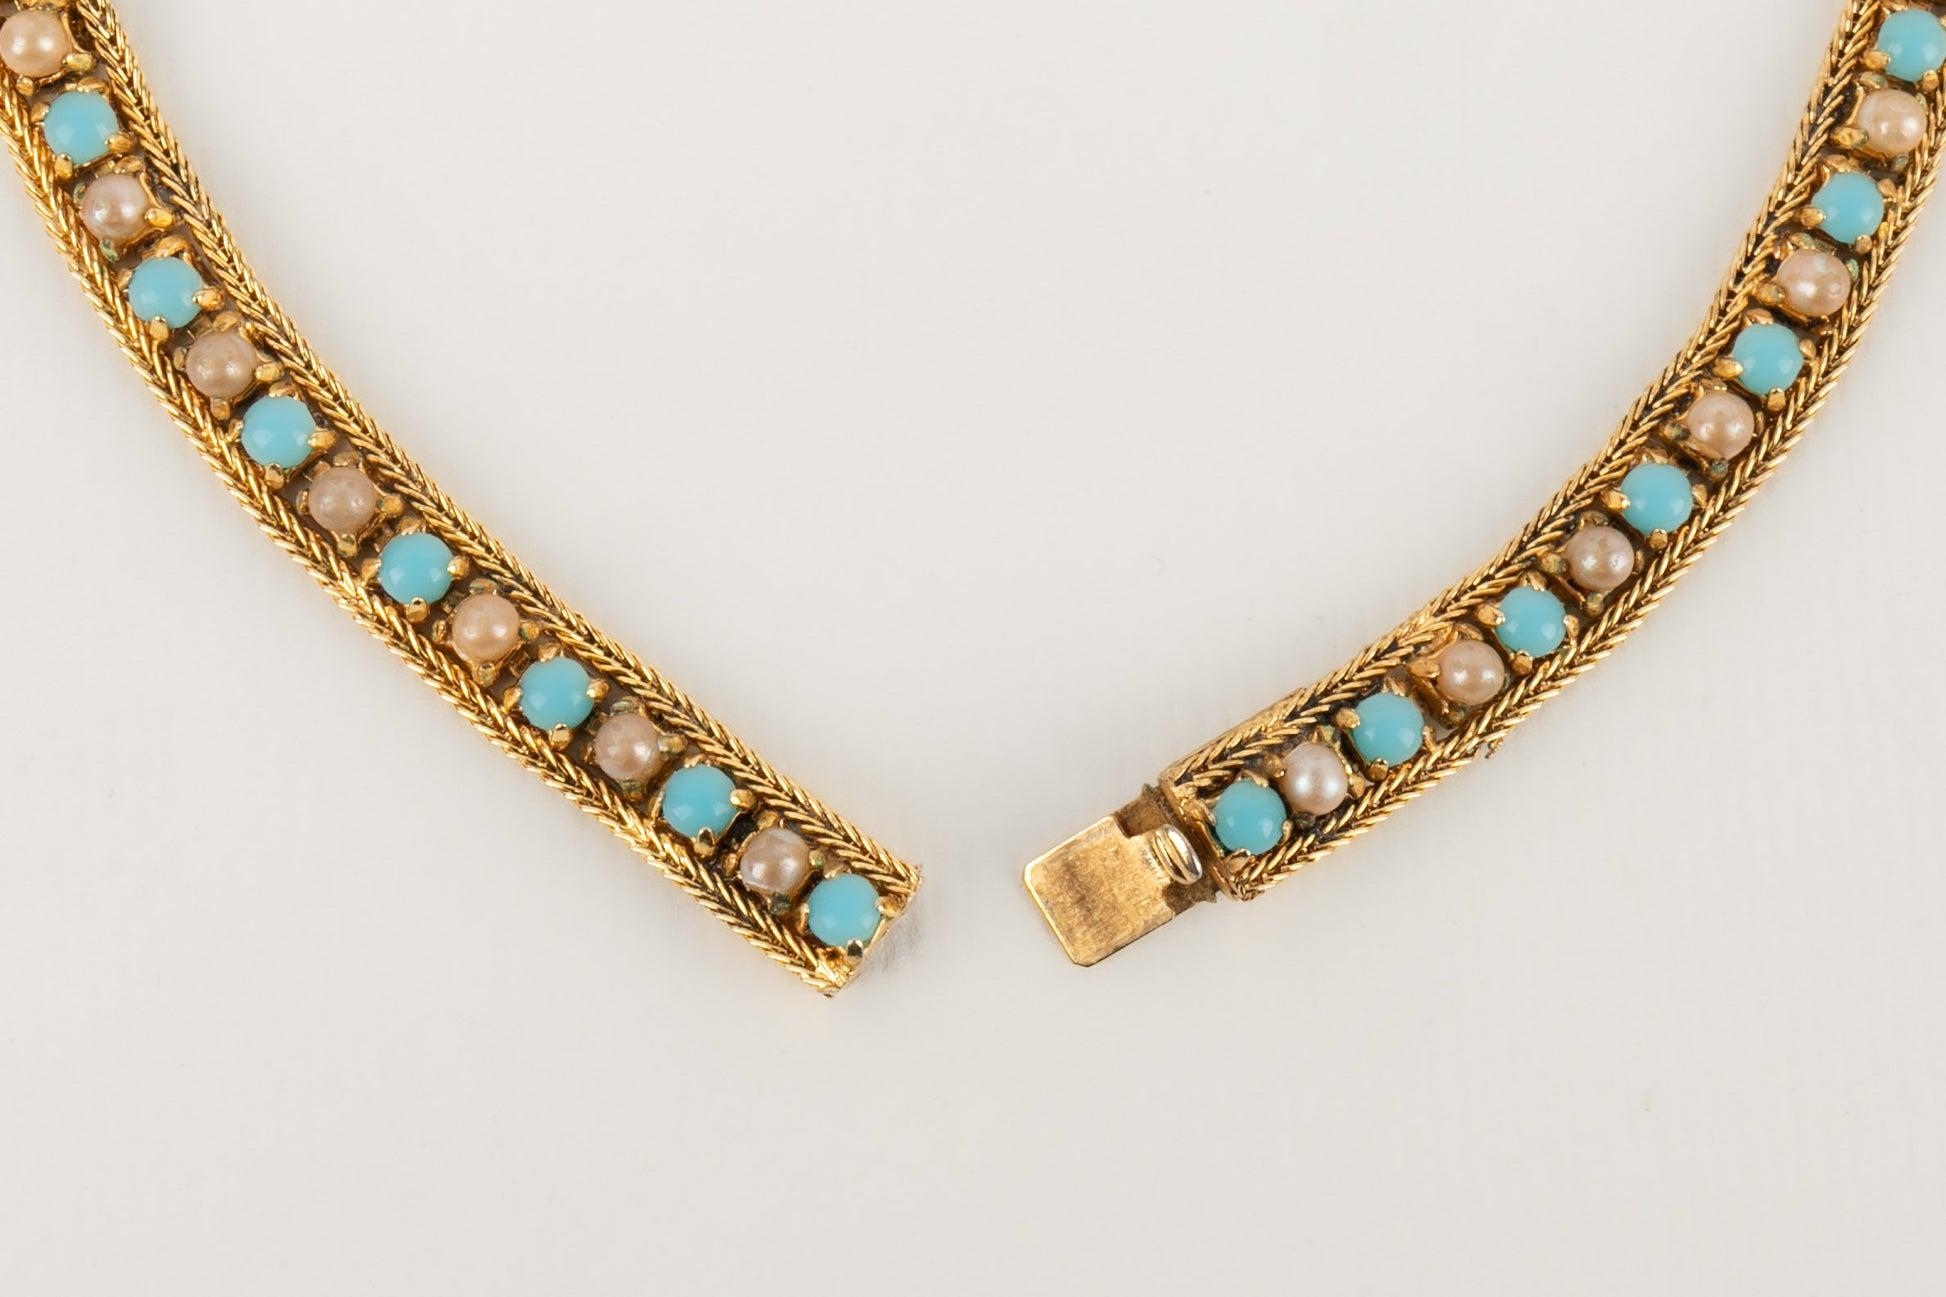 Dior Golden Metal Necklace with Costume Pearly Cabochons, 1965 For Sale 3